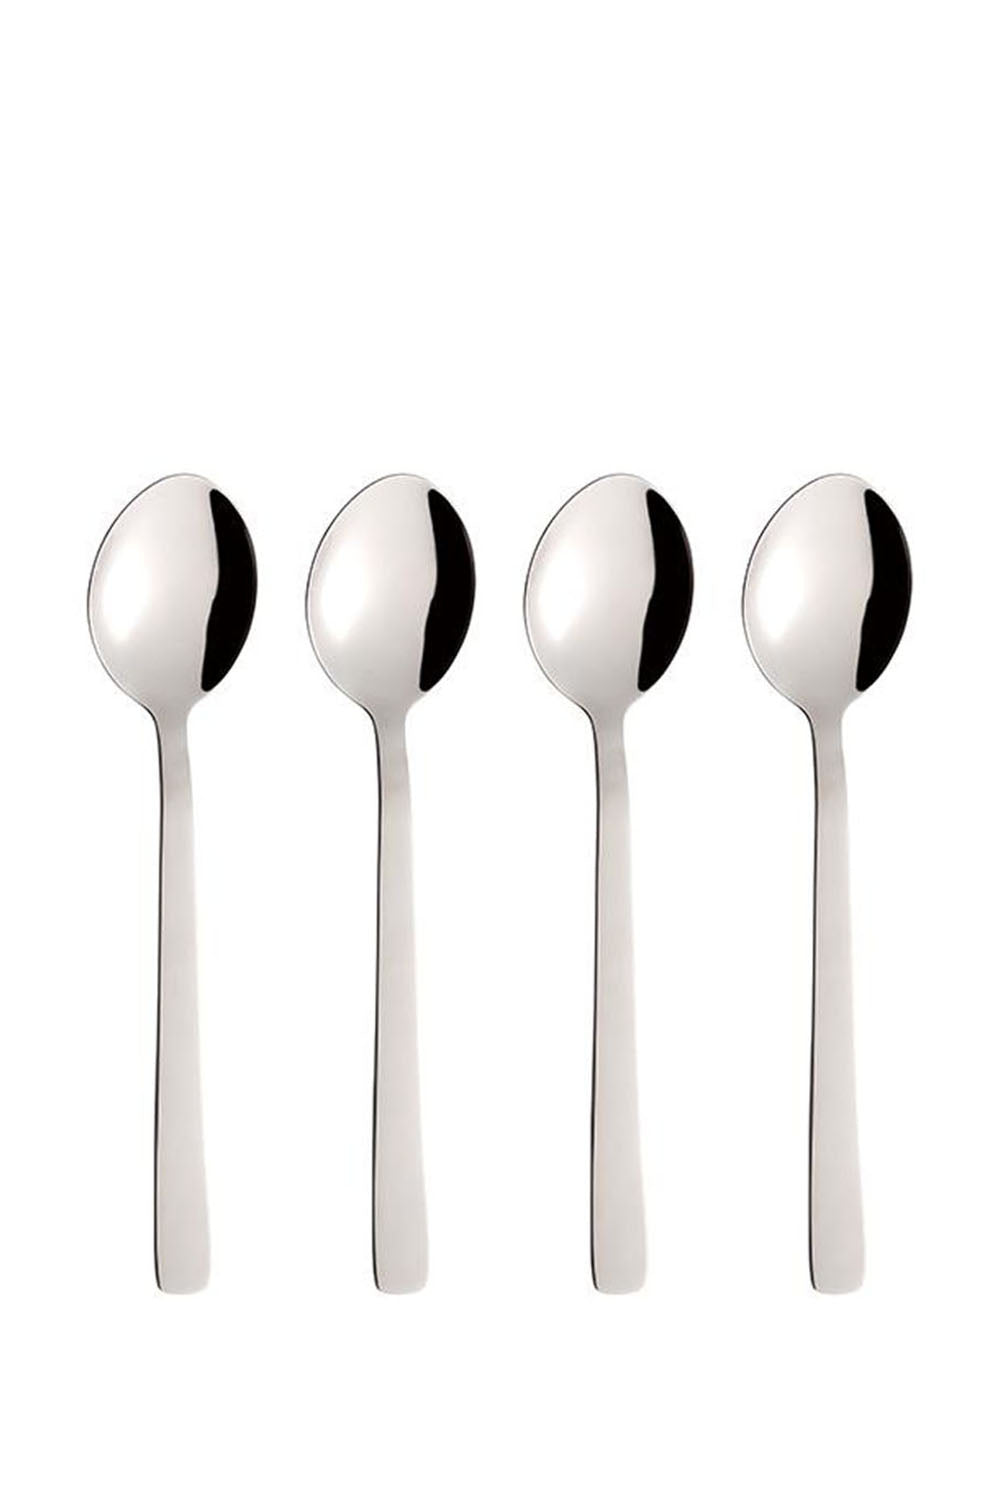 Mirror Polished Spoons Set of 4 Mirror Polished Spoons Set of 4 Maison7